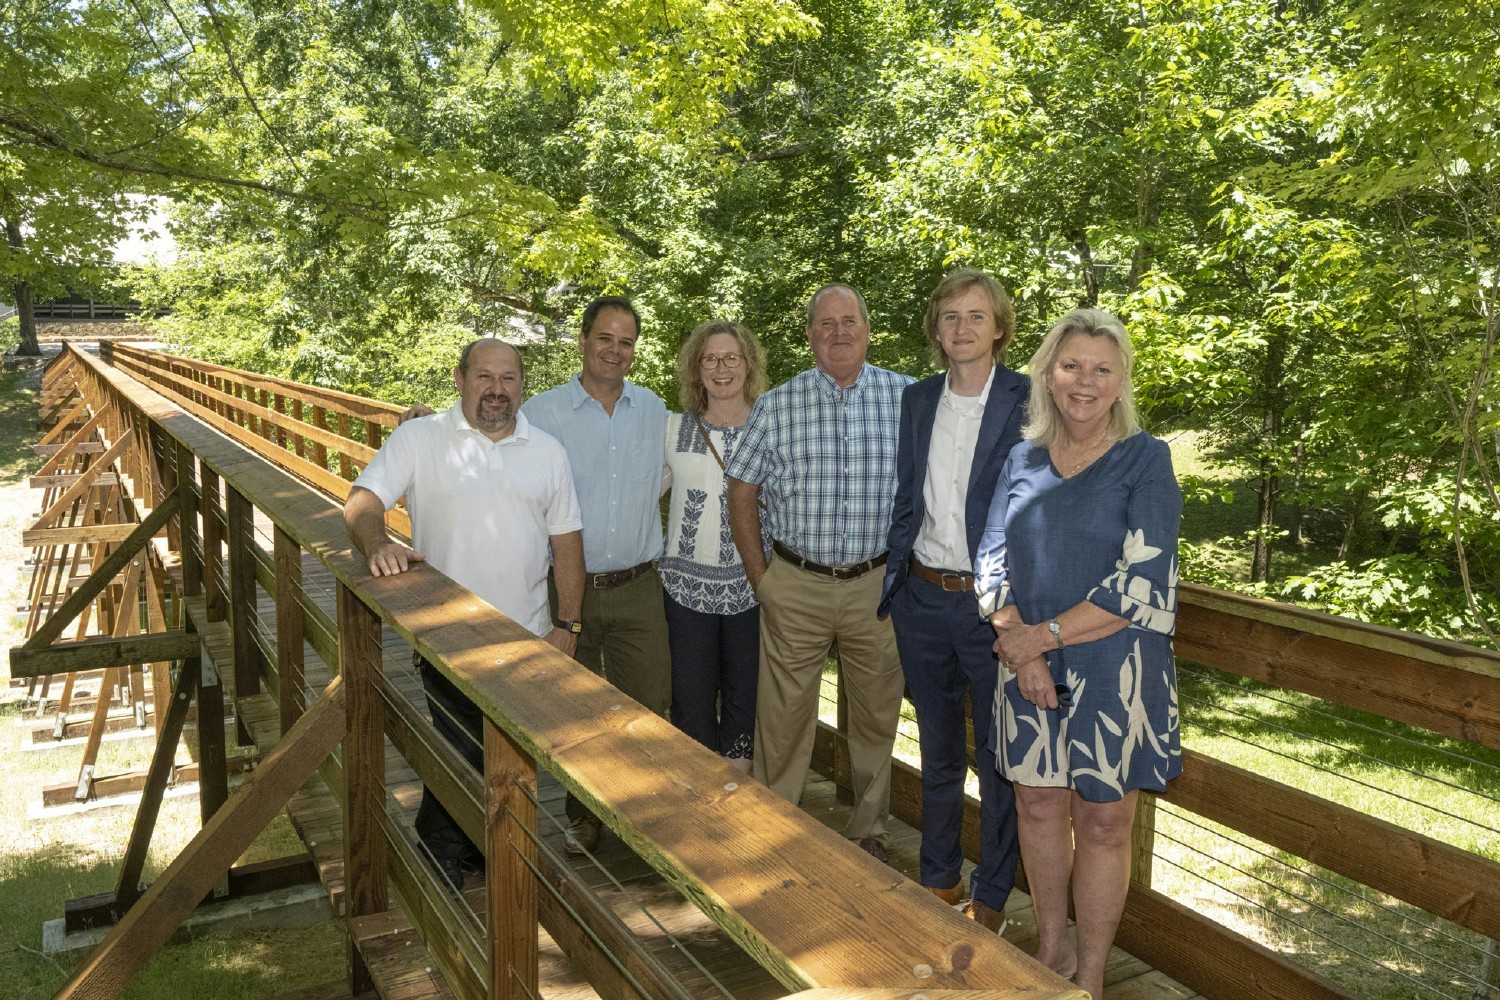 2021 Monteagle Sunday School Pedestrian Bridge Dedication after our team completed the construction of this project. 